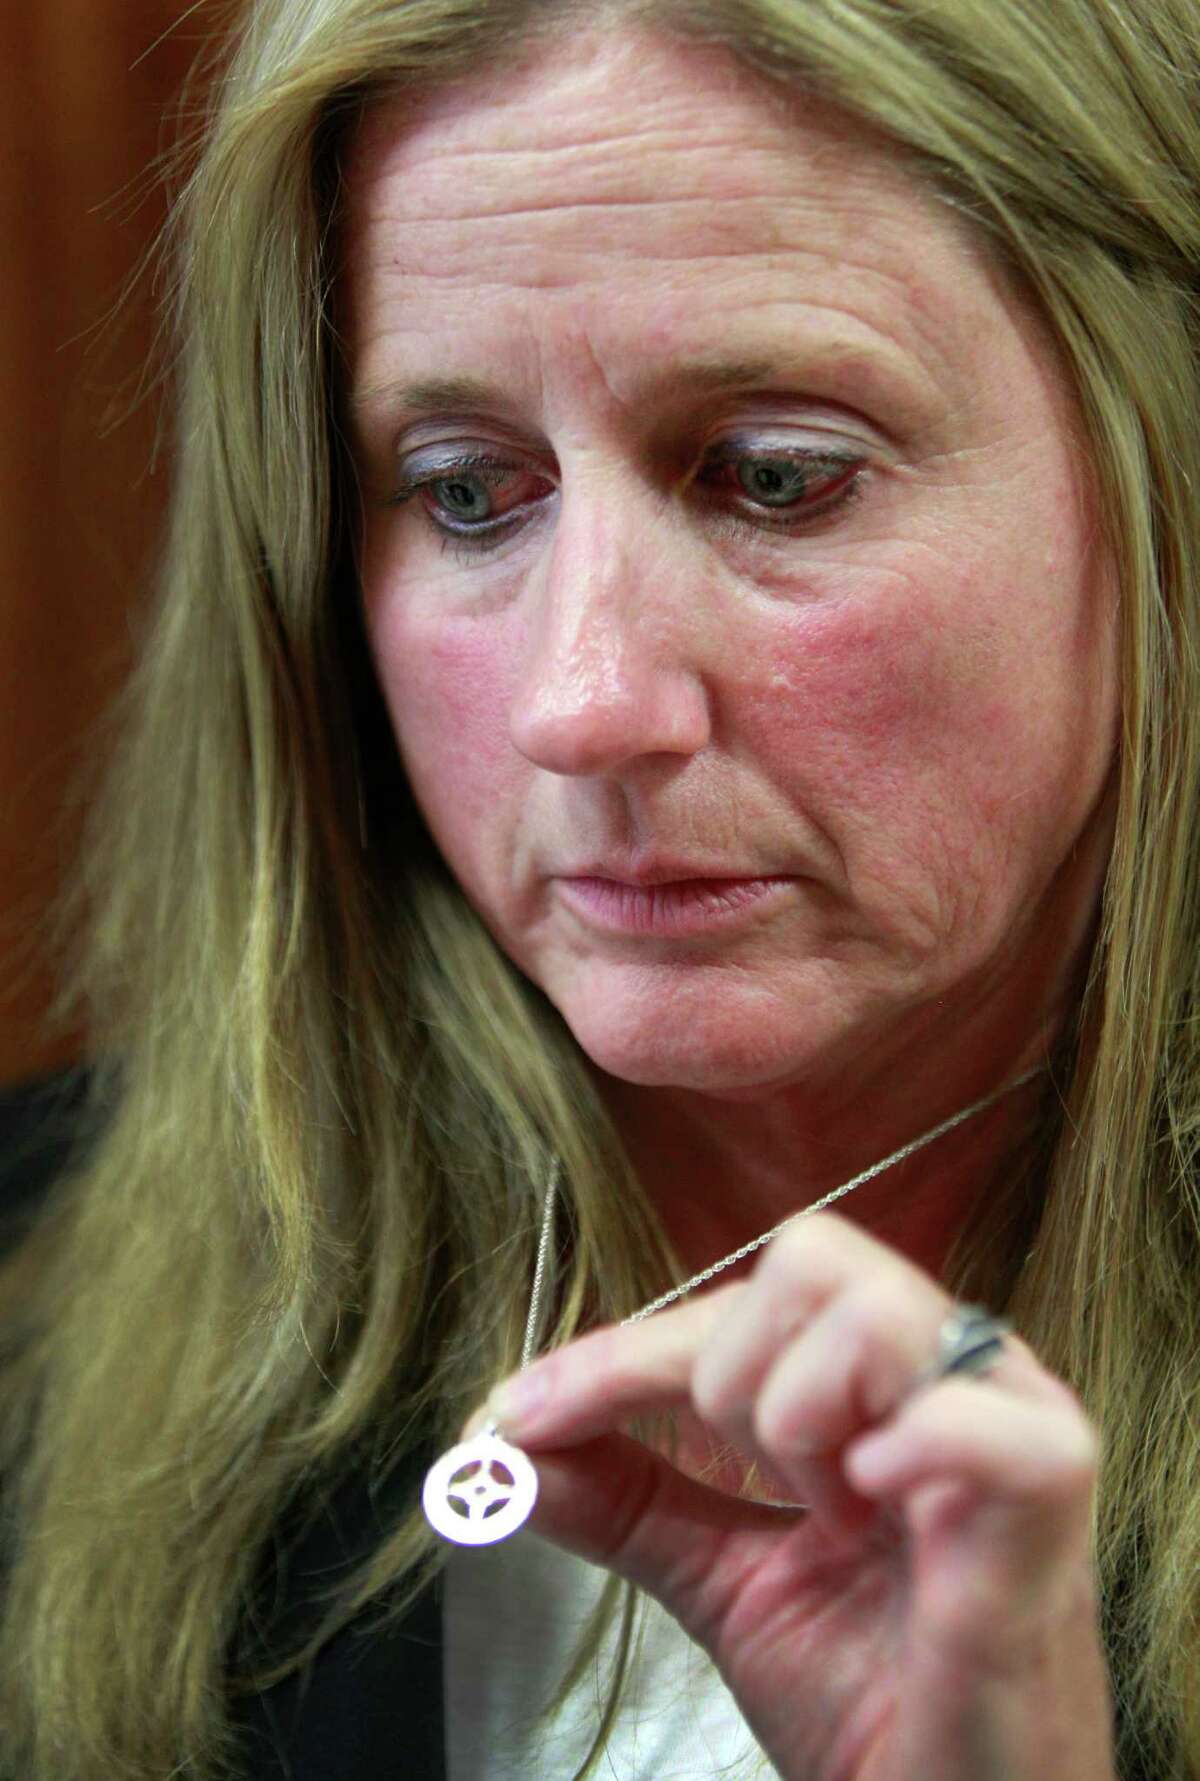 Donna Malone wears a necklace belonging to her murdered daughter, Michelle Warner, mother of two, who was strangled by her boyfriend, Mark Castellano, who first claimed she abandoned her kids.